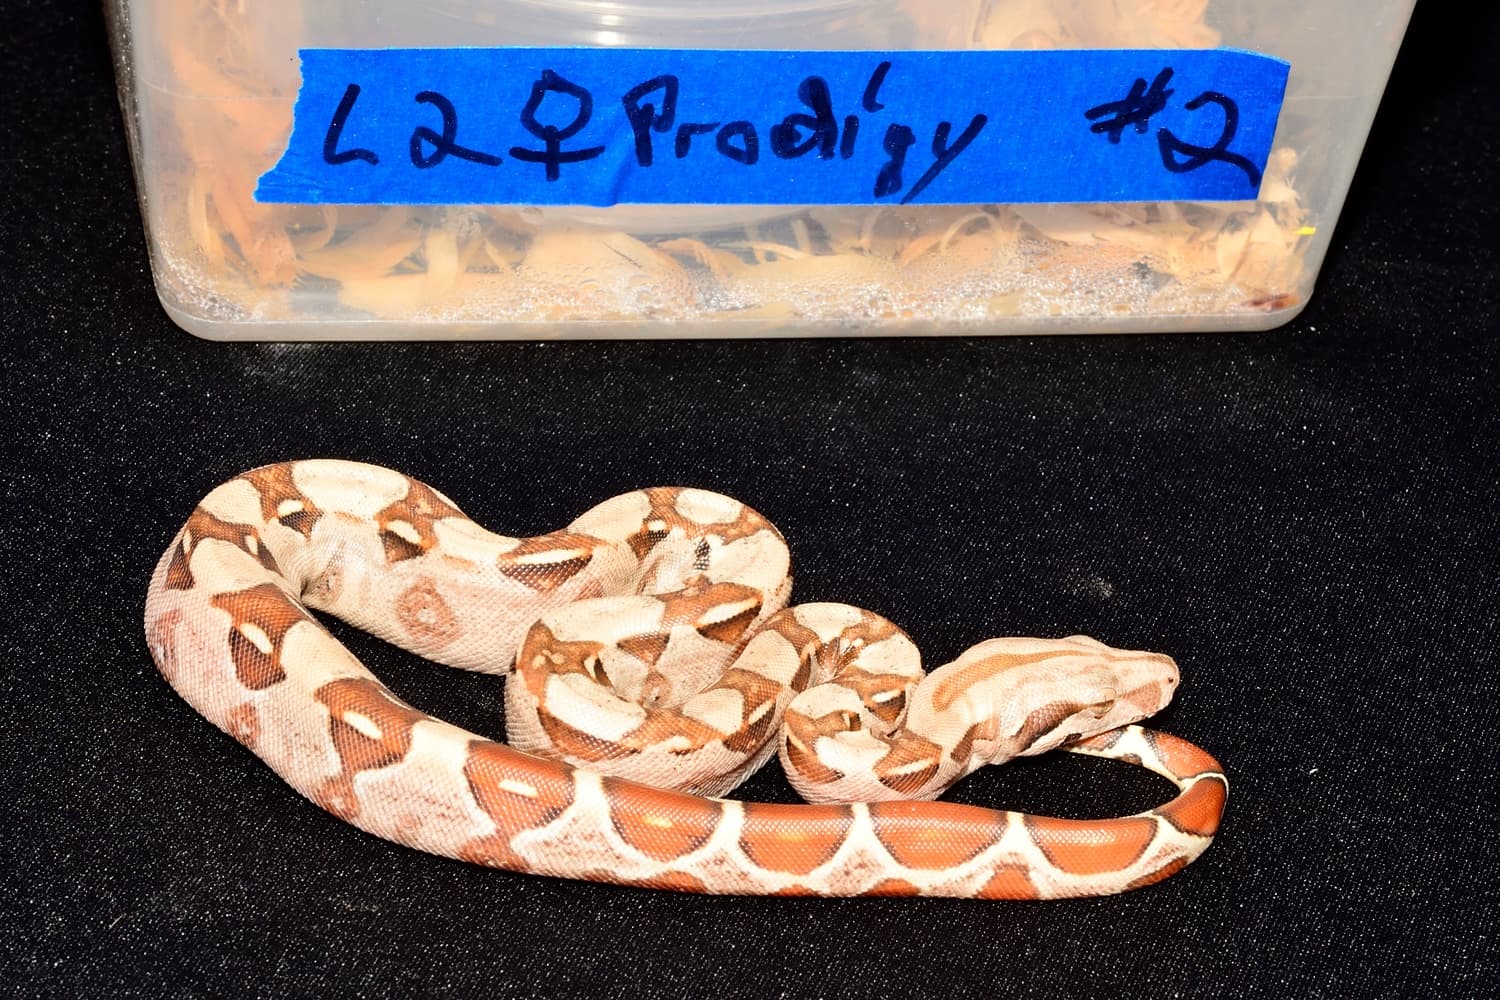 Prodigy T Boa Constrictor by Mainely Boas